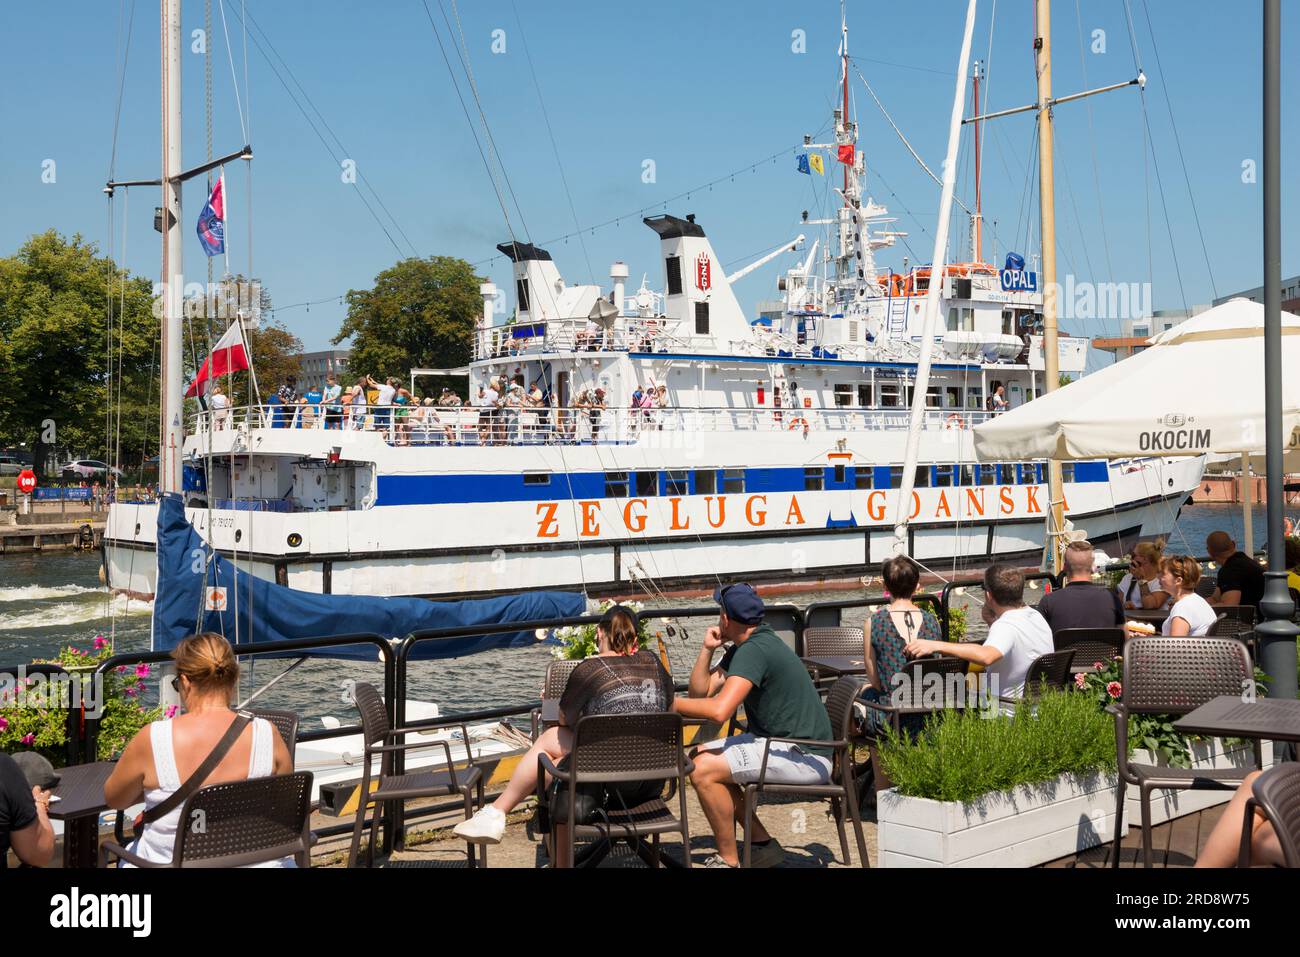 Zeluga Gdanska cruise ship in Motlawa River passing by alfresco dining tourists in the Old Town of Gdansk, Poland, Europe, EU Stock Photo